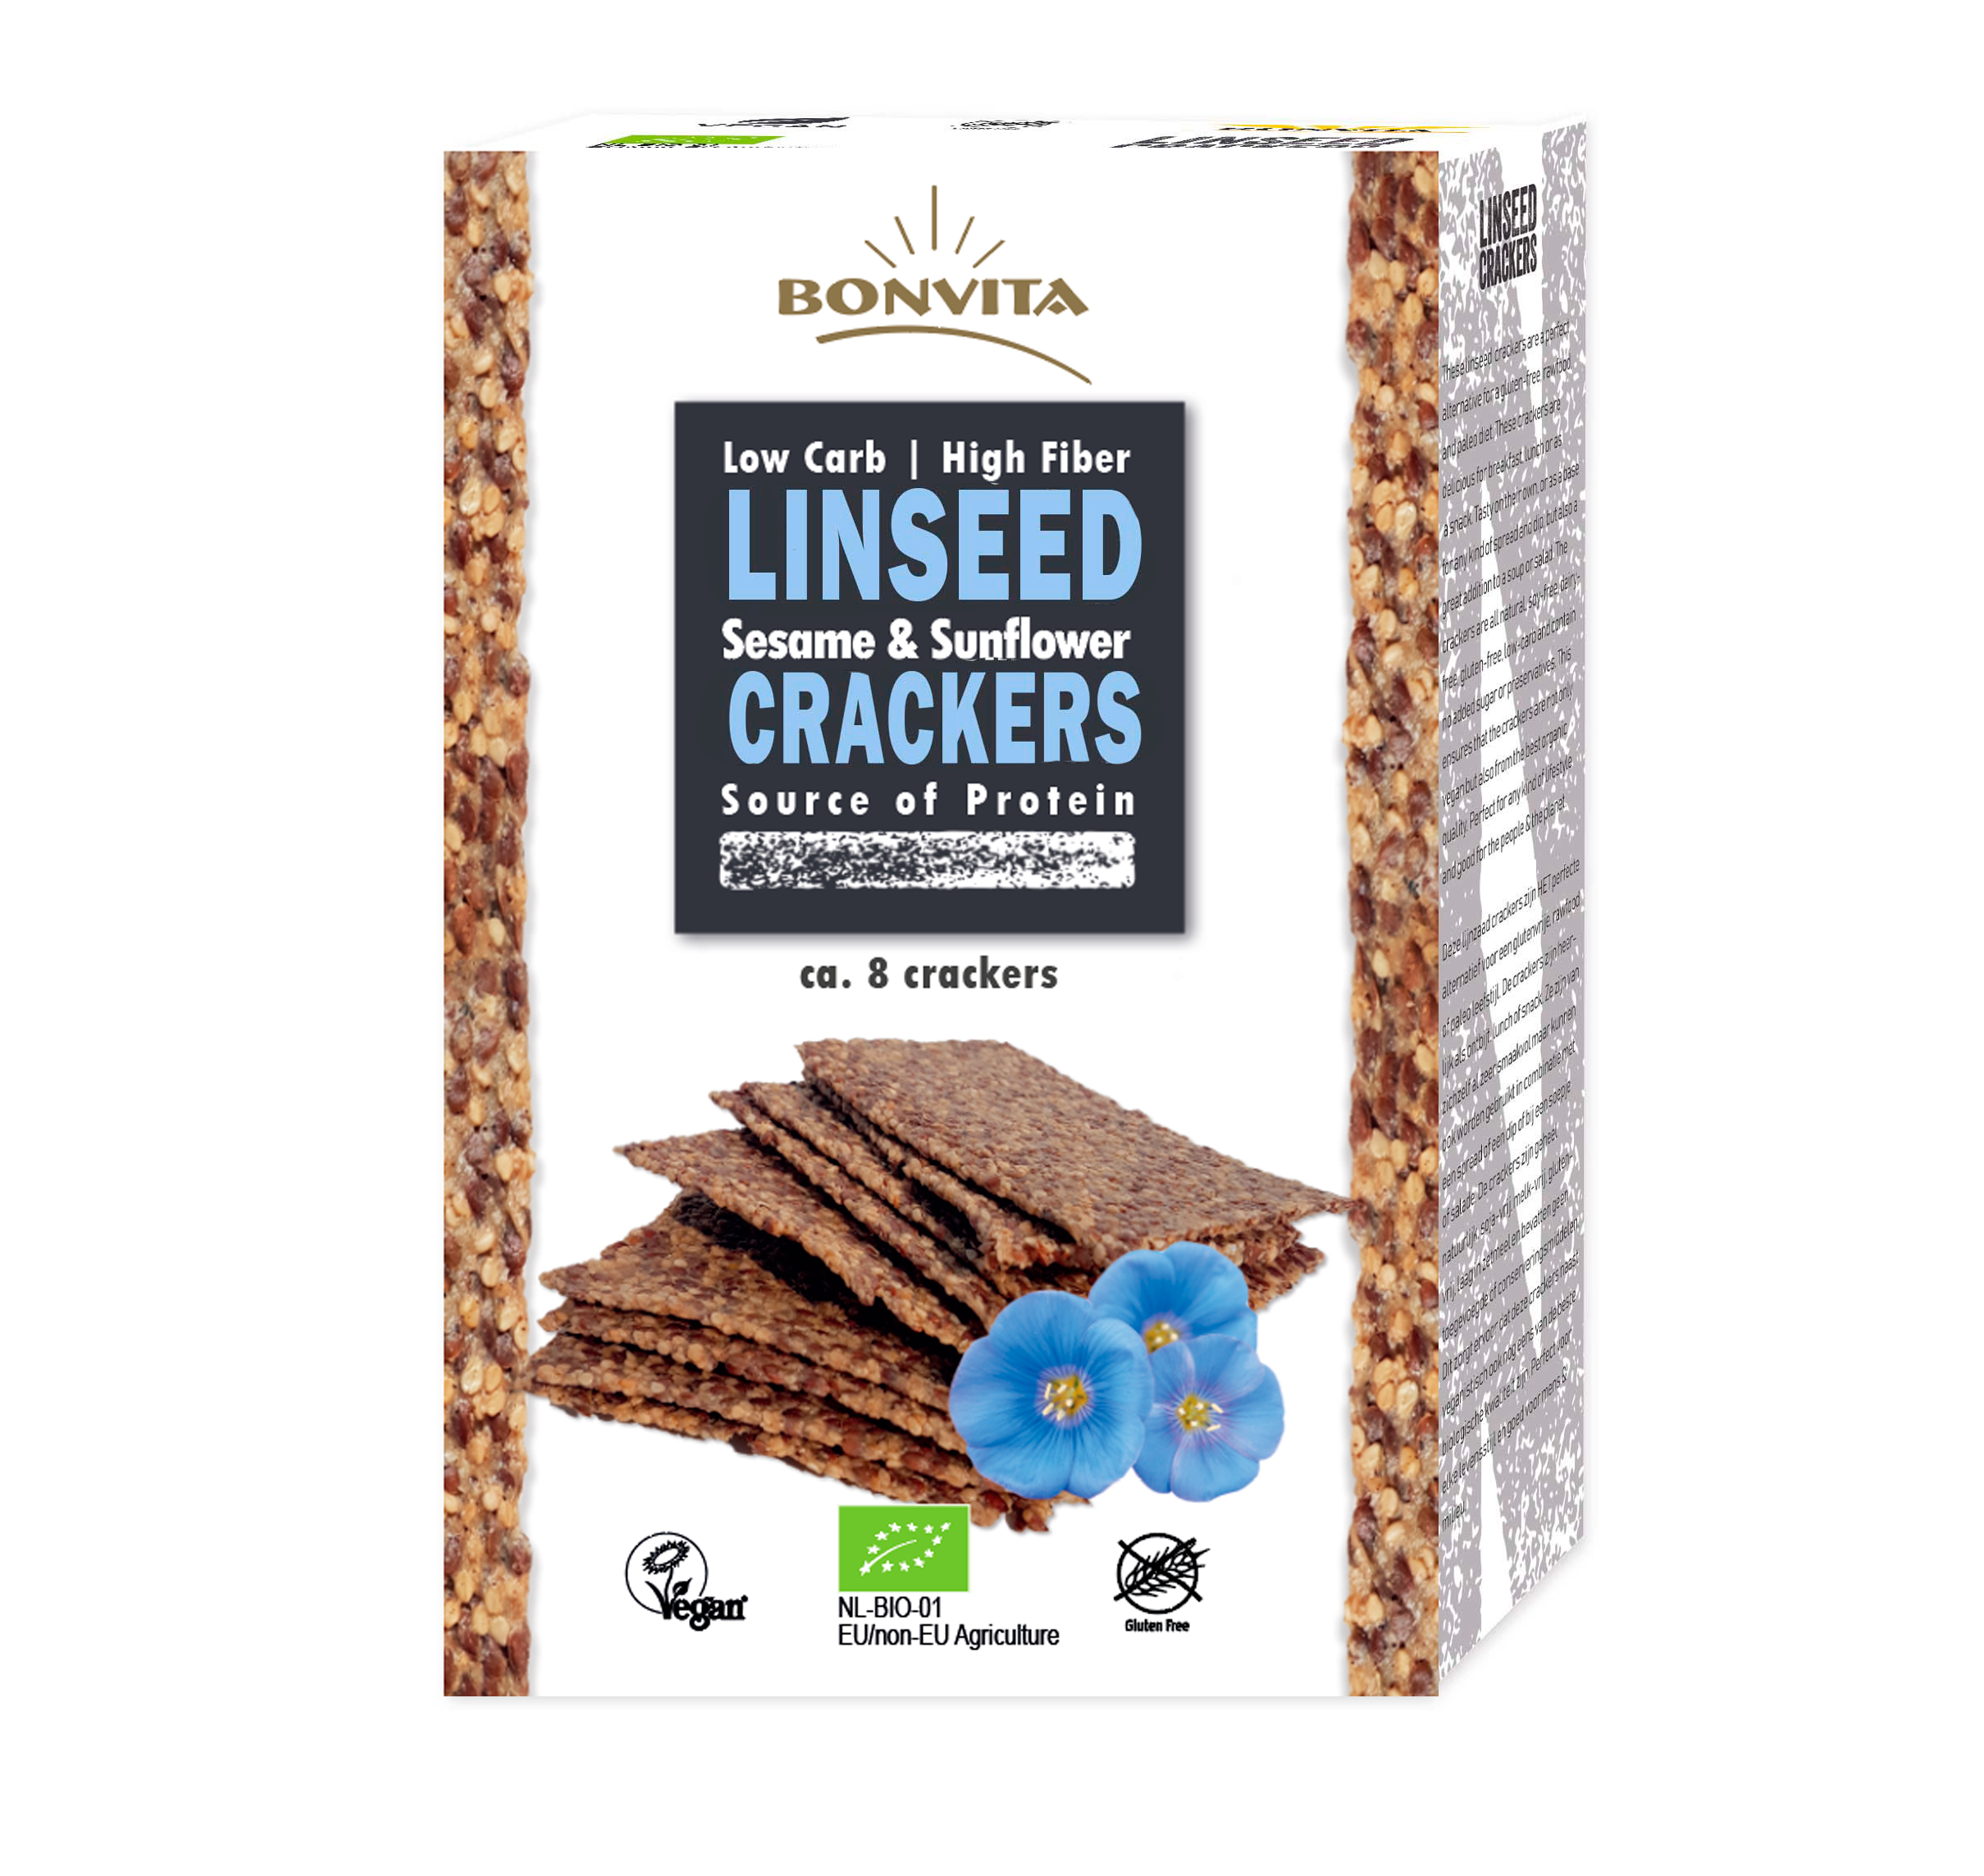 6x Linseed cracker